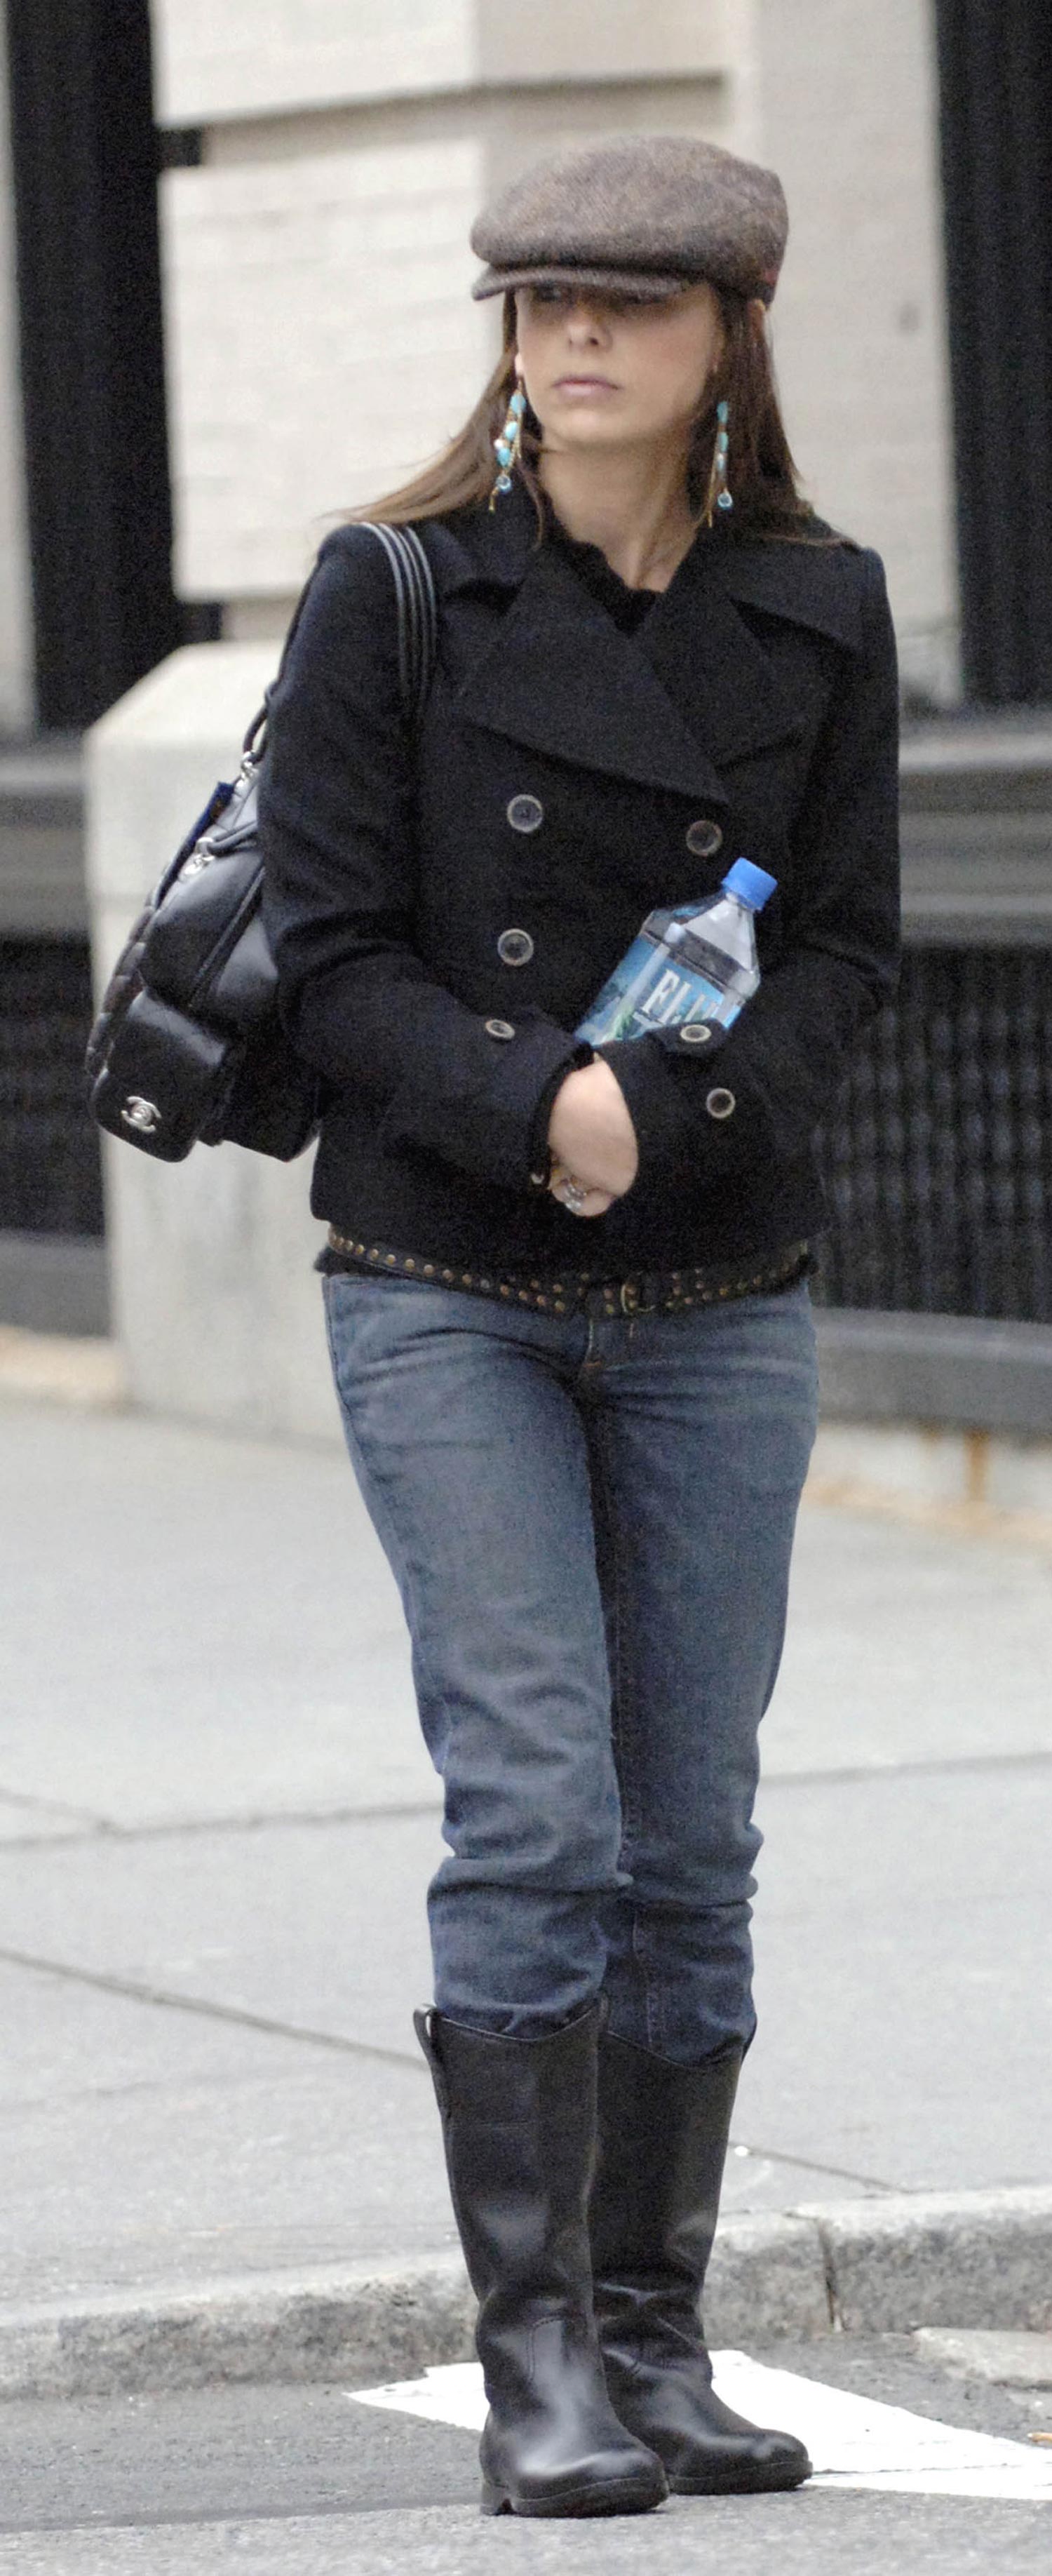 sarah-michelle-gellar-out-and-about-new-york-oct-2005-hq-01-1500.jpg